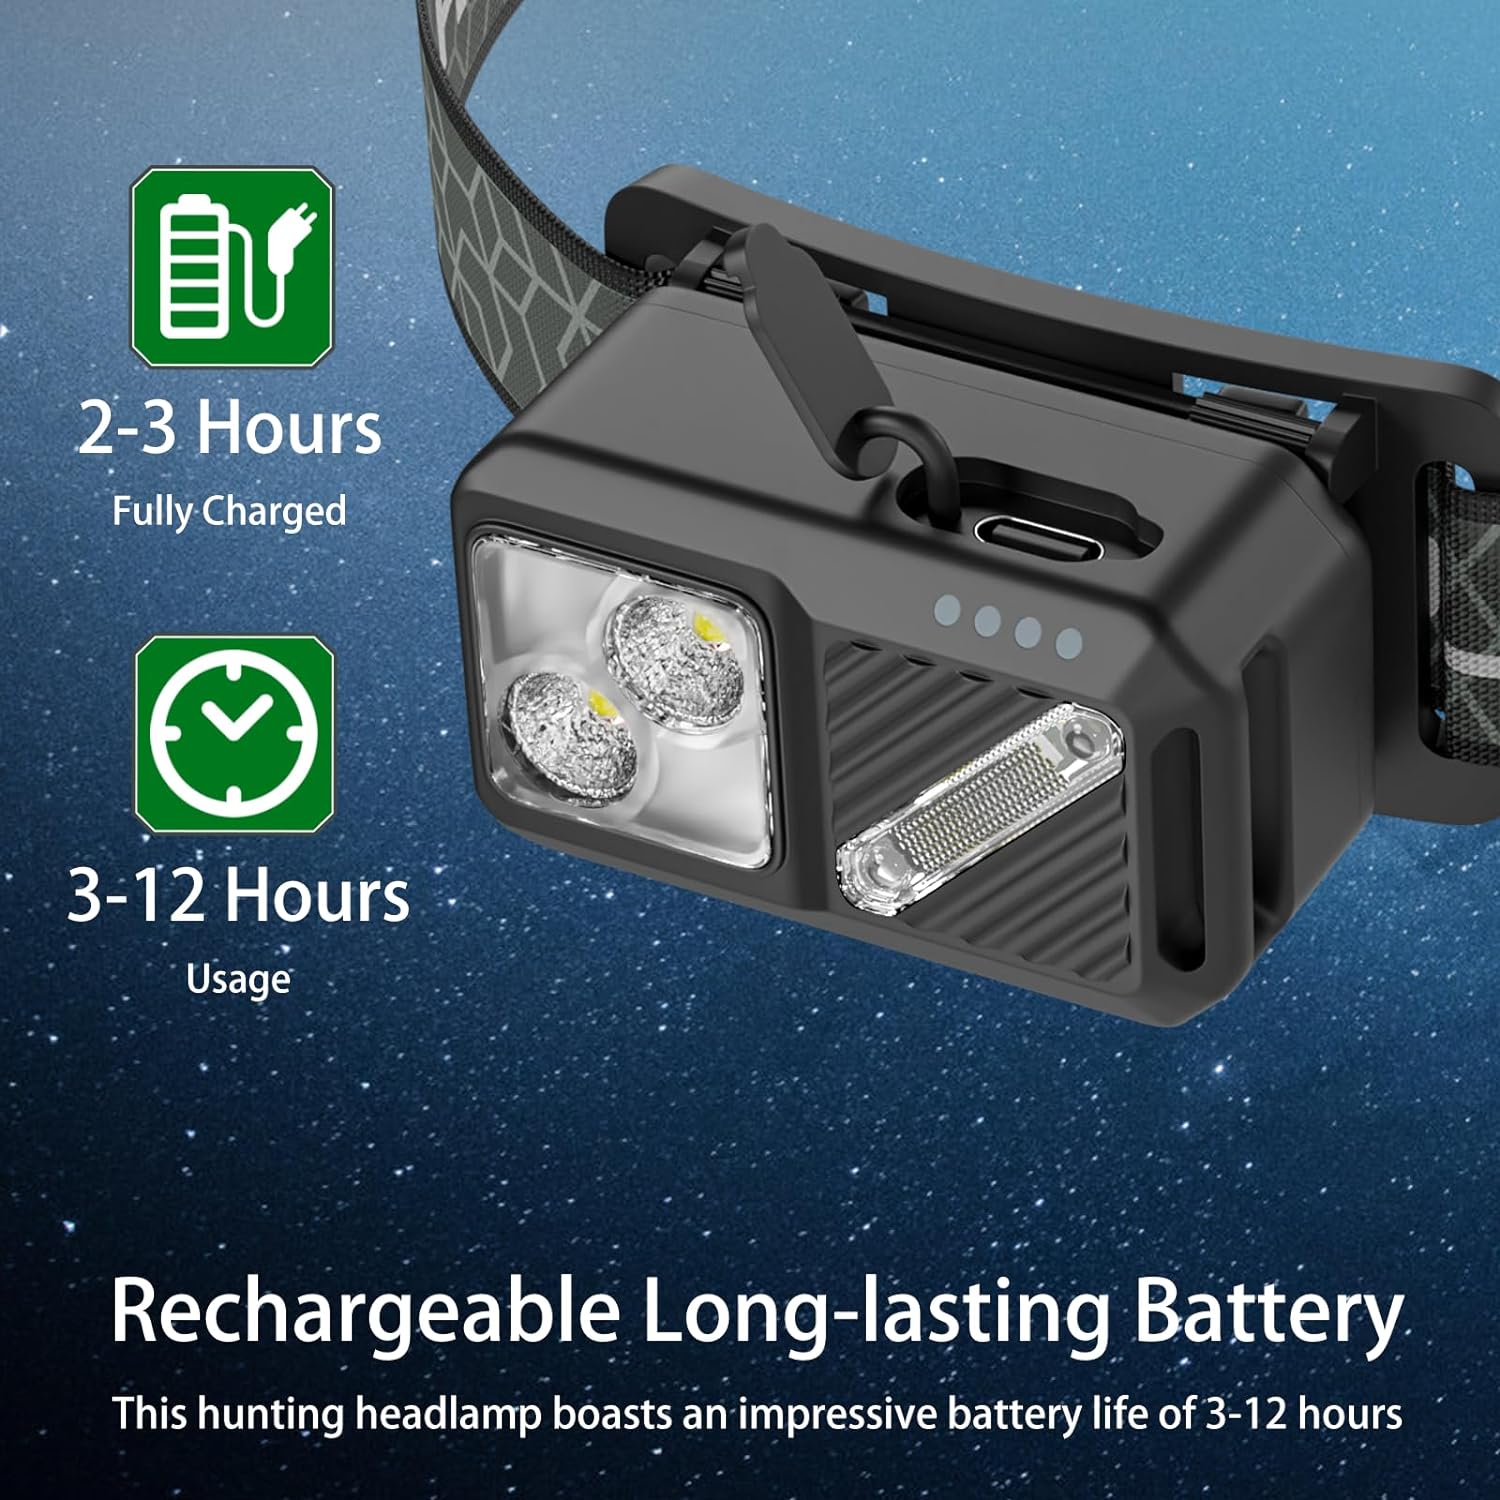 2 Pack Rechargeable LED Headlamp, 1500 Lumen Head Lamp with Motion Sensor, Bright Head Light with 7 Modes, USB Recharge Flashlight Camping Accessories, Waterproof Headlight Camping Gear for Outdoors